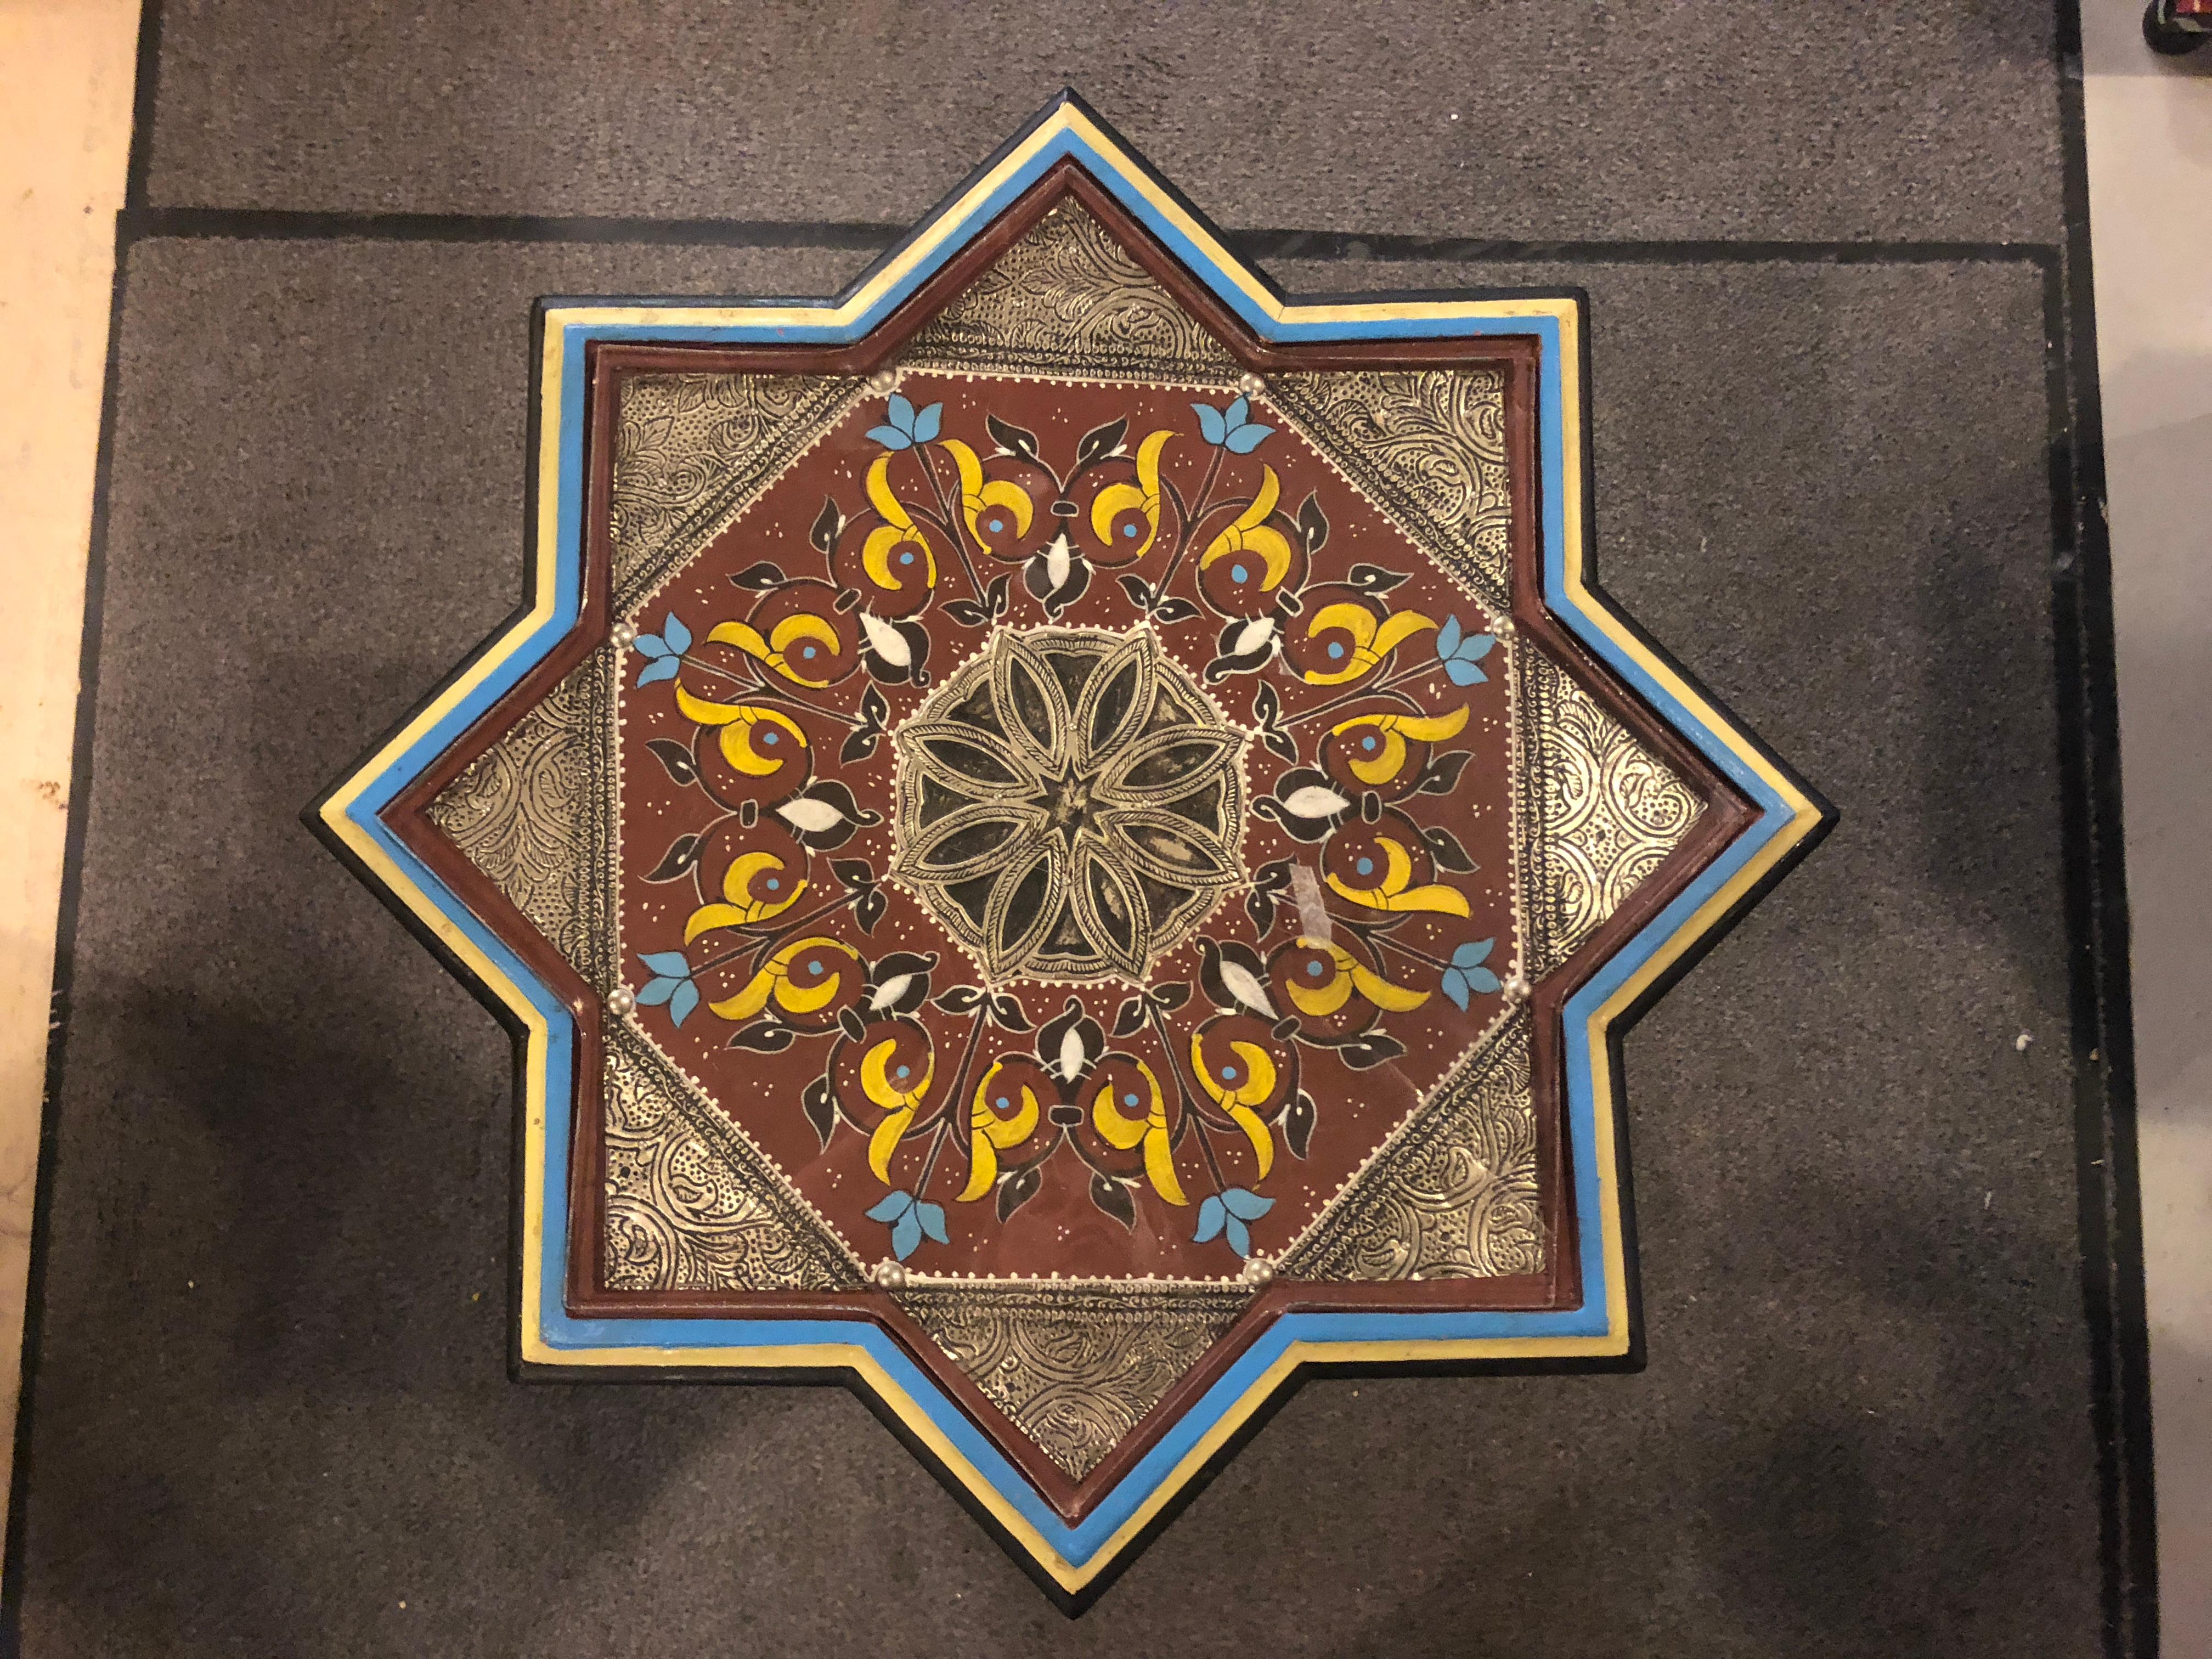 This astounding star-shaped wooden and brass inlaid table is an exotic and sophisticated addition to any room. Featuring a dazzling swirl of images, powerful color combinations and a beautifully realized Moorish component, you can be assured this